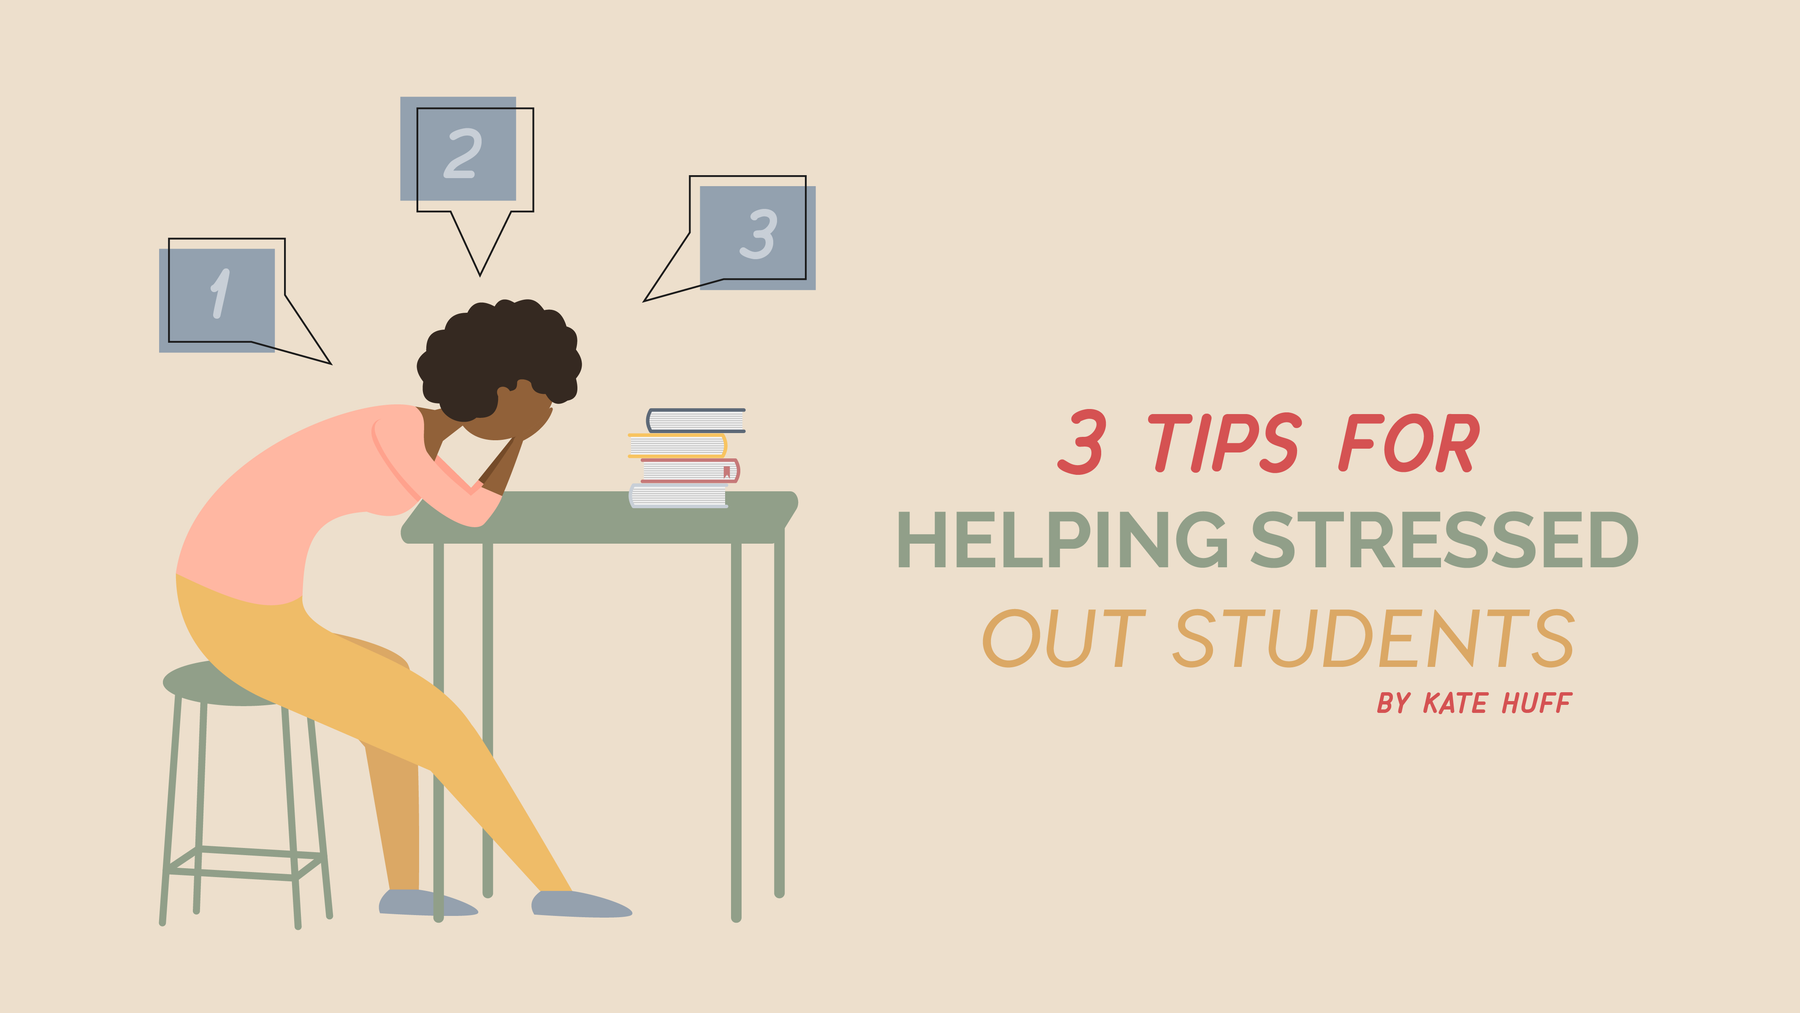 3 Tips For Helping Stressed Out Students